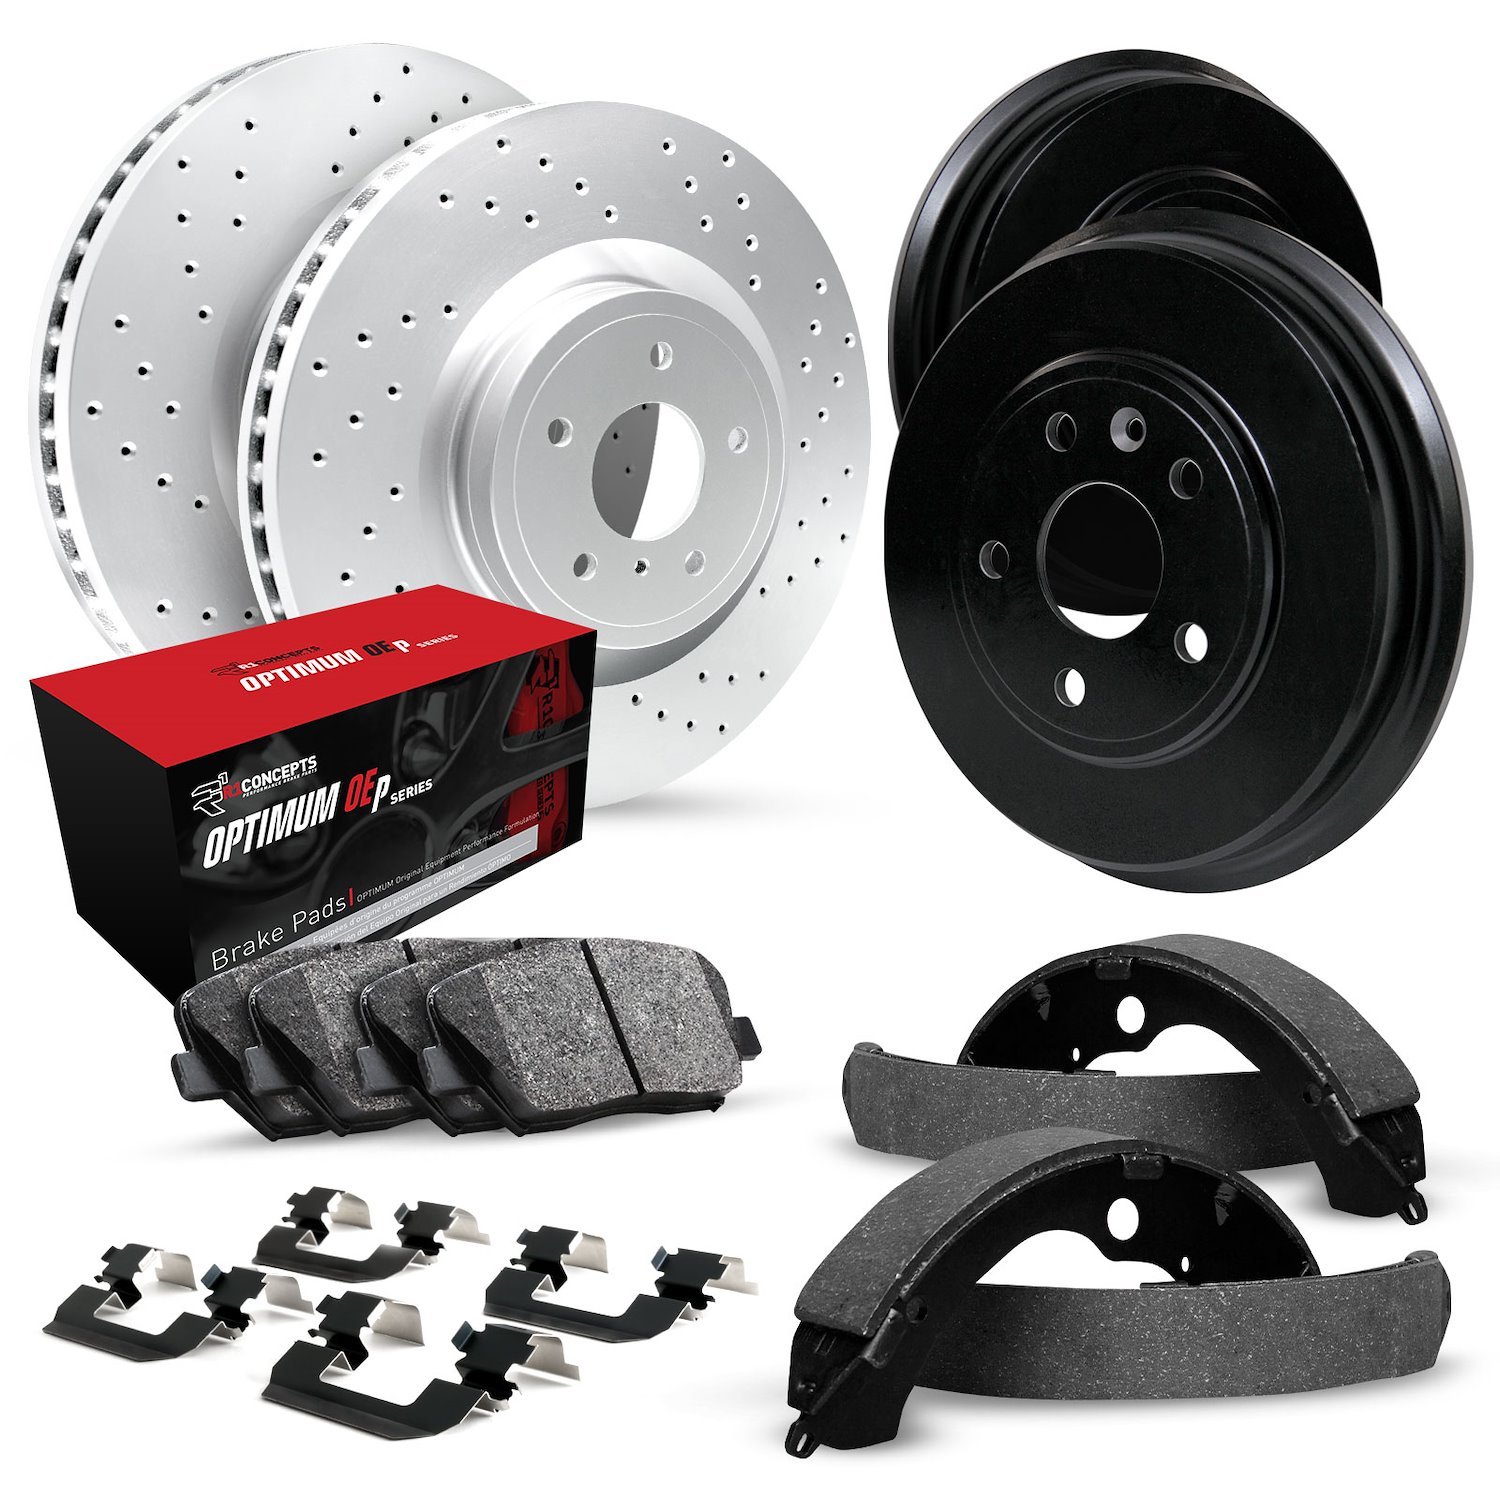 GEO-Carbon Drilled Brake Rotor & Drum Set w/Optimum OE Pads, Shoes, & Hardware, 2000-2003 GM, Position: Front & Rear